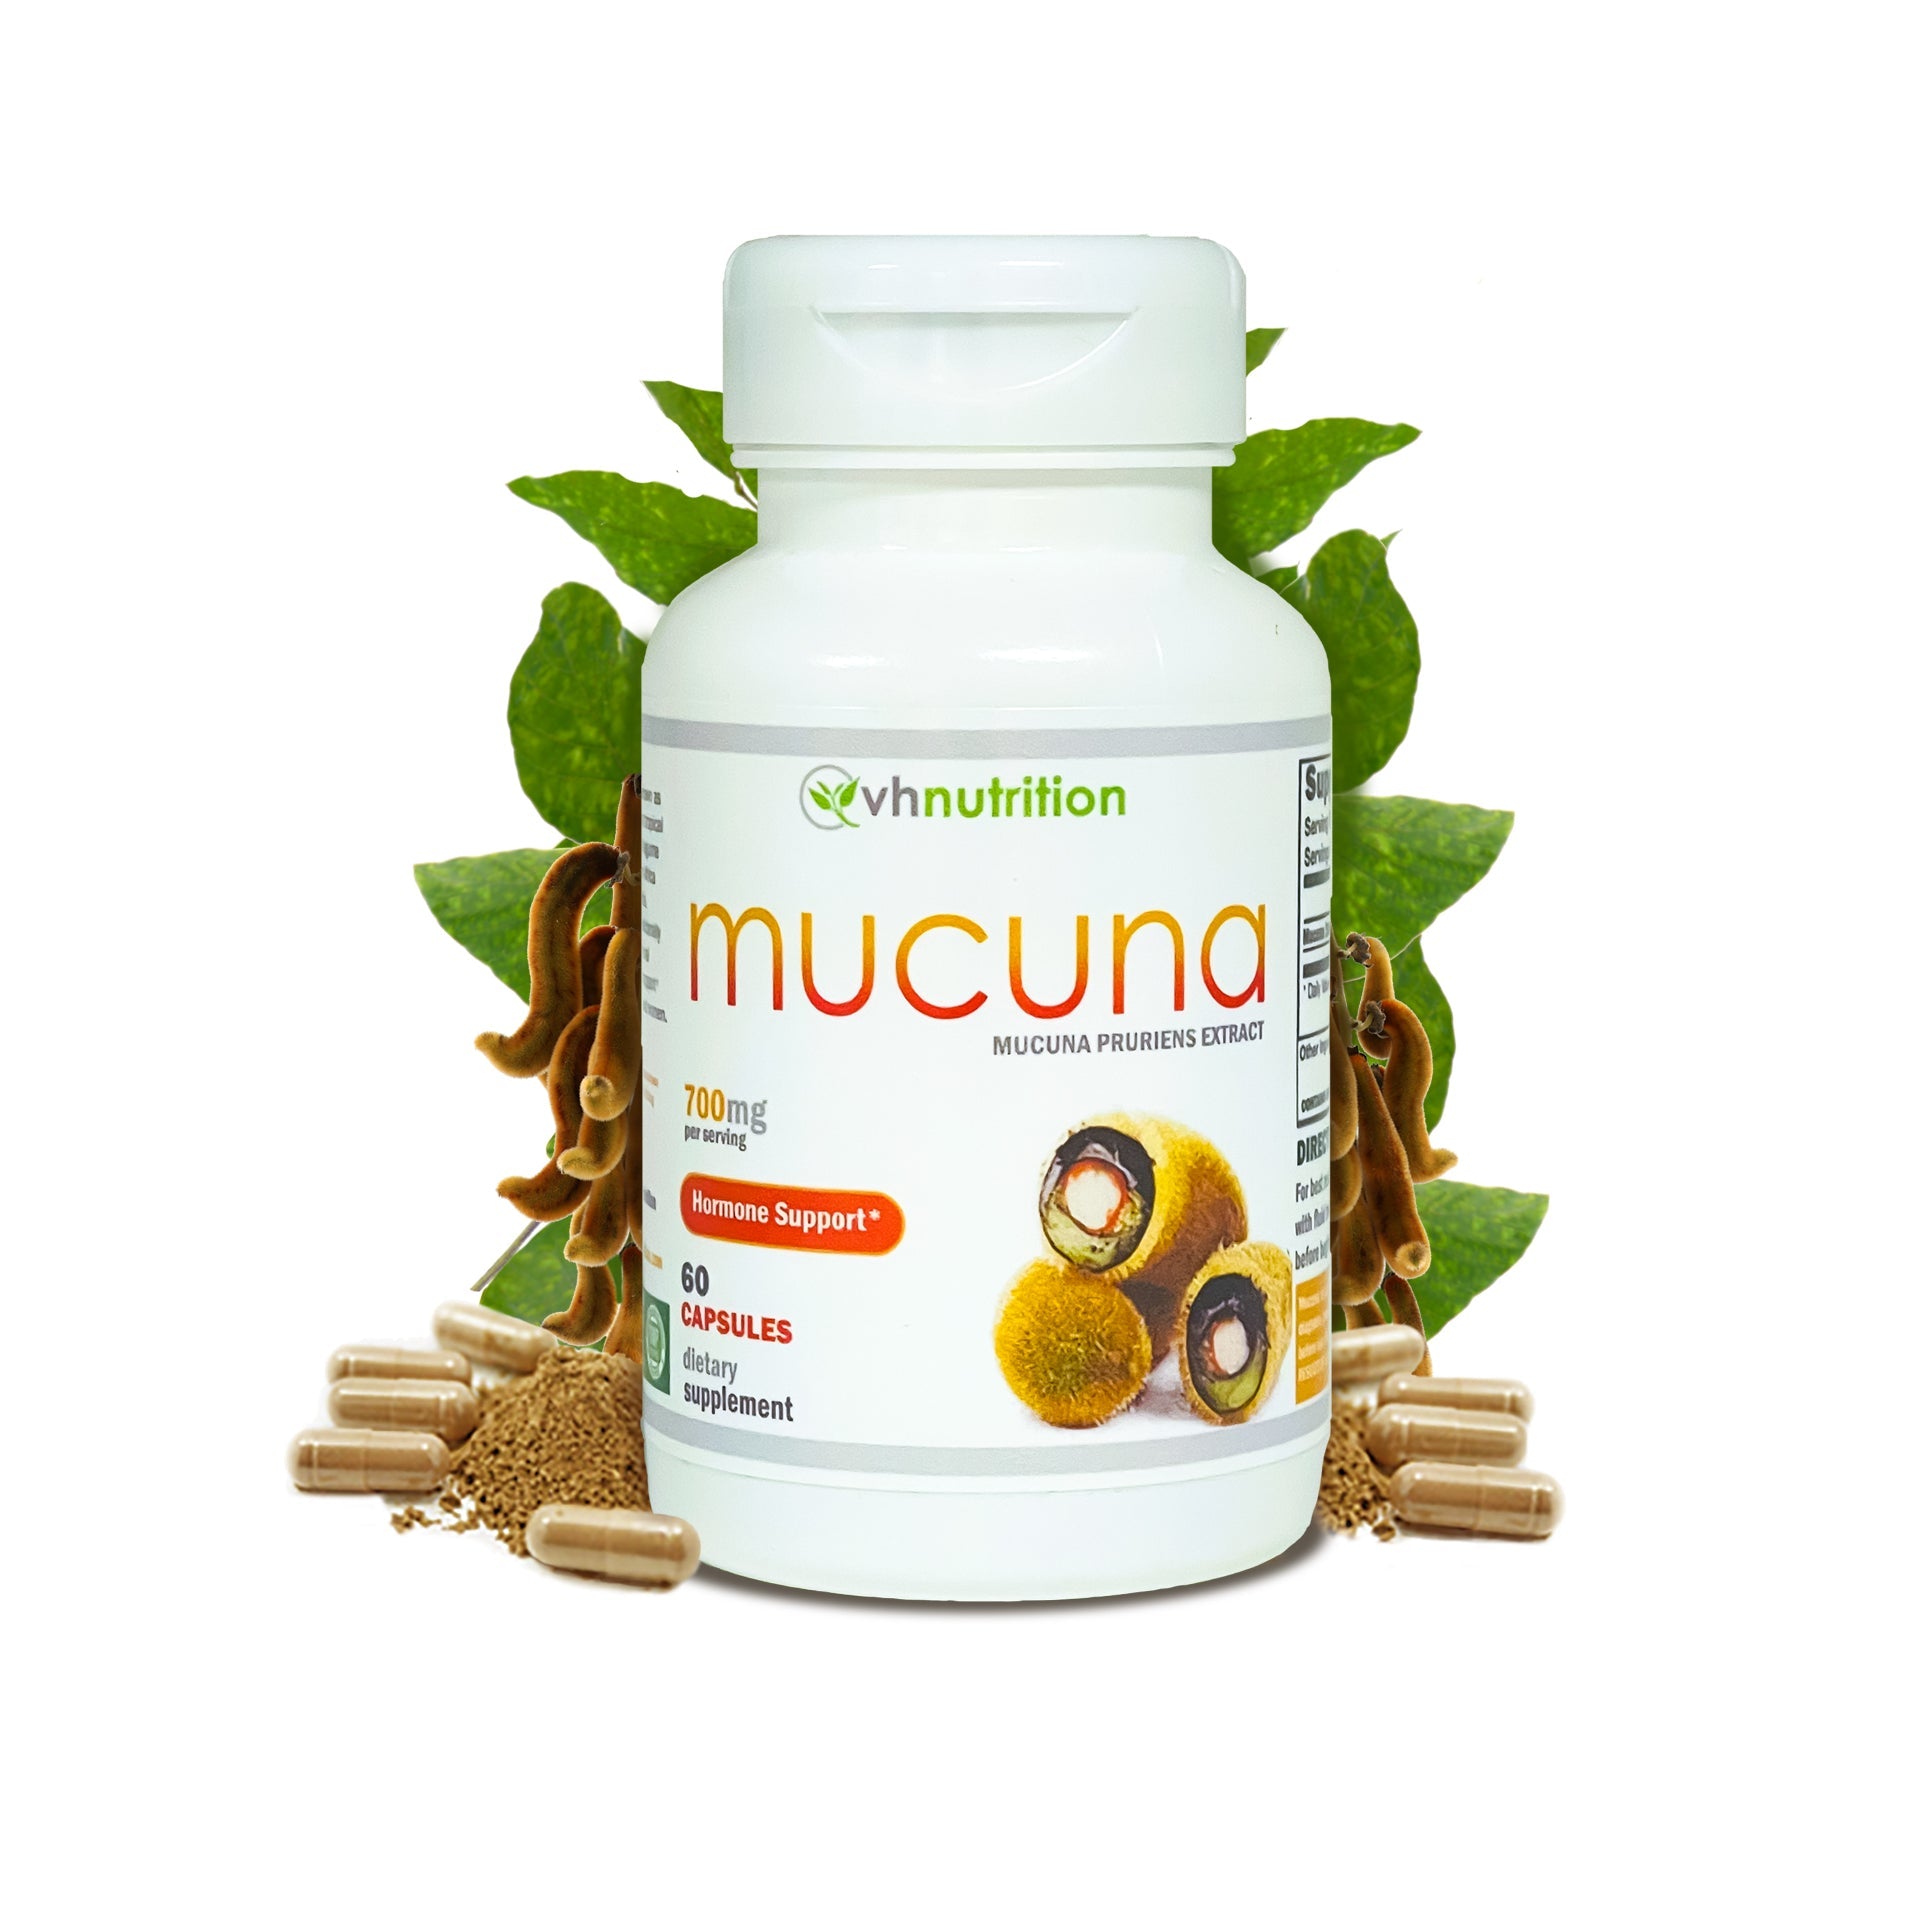 VH Nutrition MUCUNA | Hormone Support* For Men and Women | 700mg Proprietary Formula | 60 Capsules